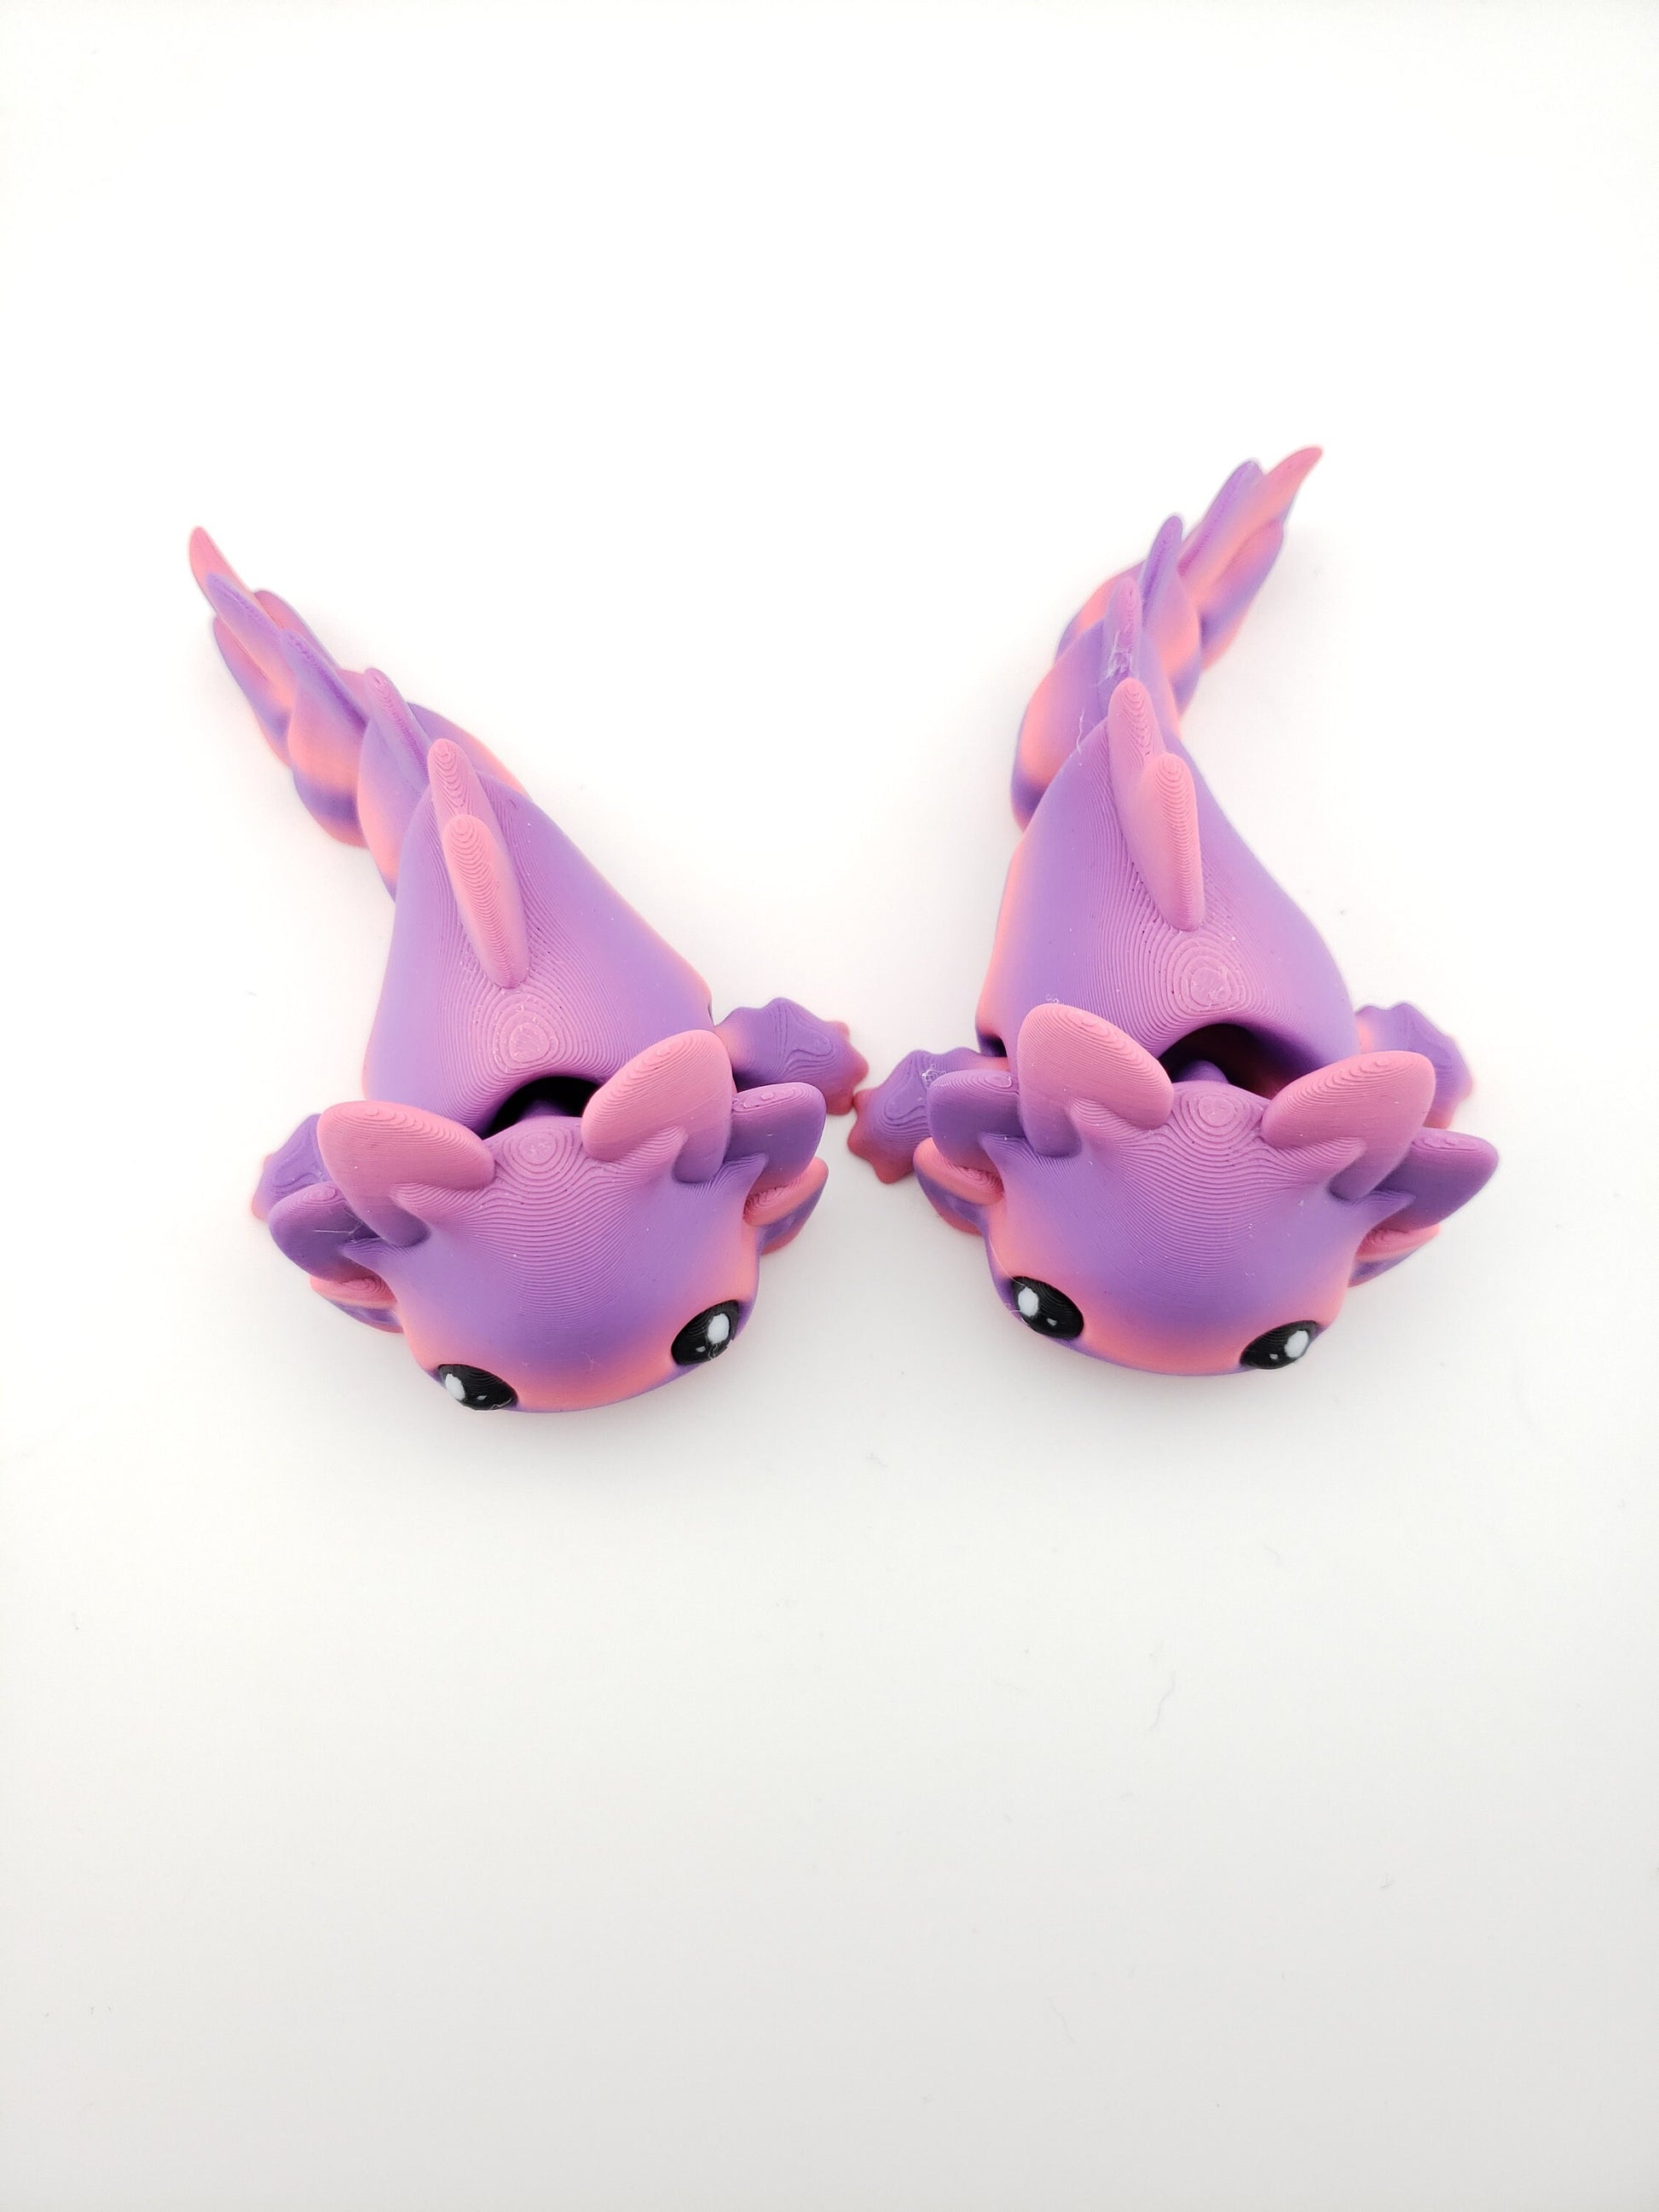 1 Articulated Axolotl -- Keychain Decor Gift - 3D Printed Fidget Fantasy Creature - Customizable Colors - Authorized Seller